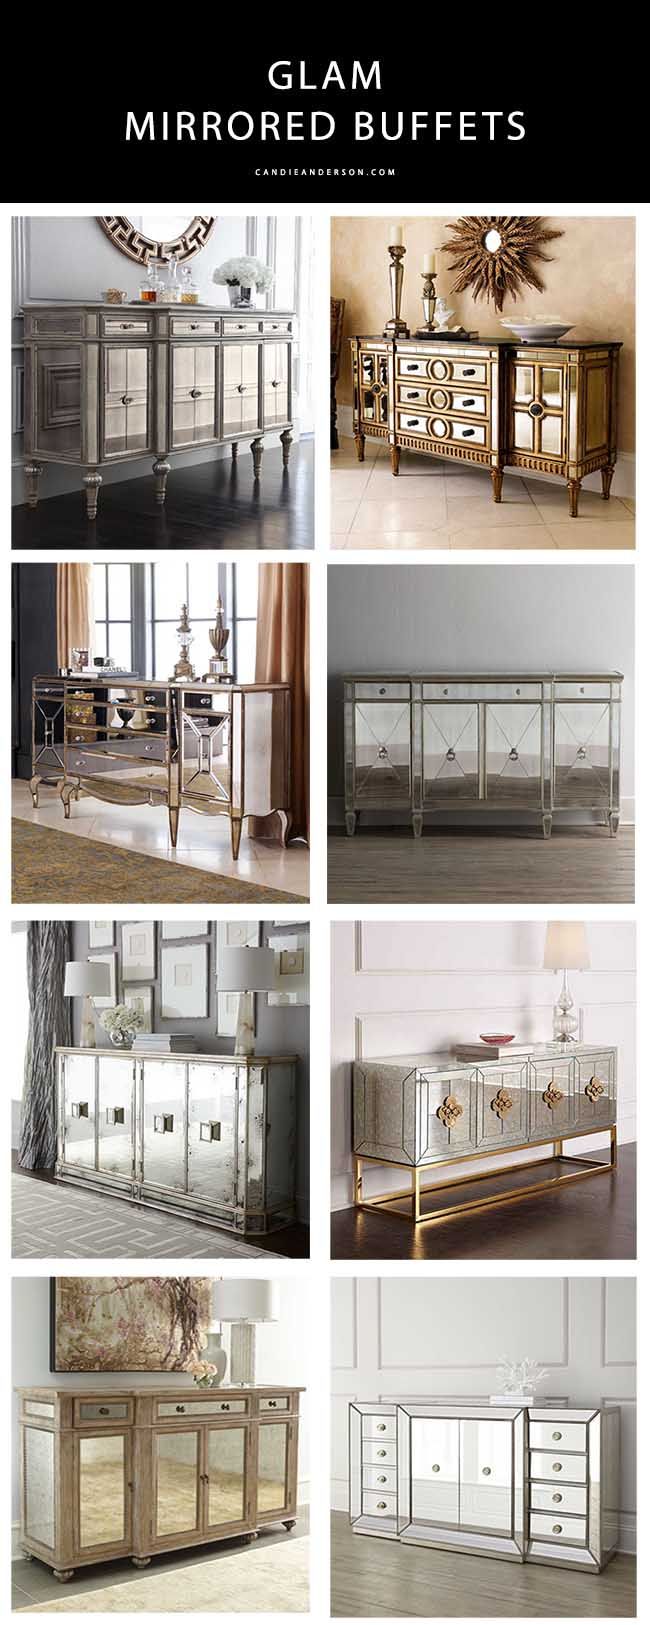 30 Glam Mirrored Buffets You'll Adore For Years To Come With Mirrored Buffets (View 24 of 30)